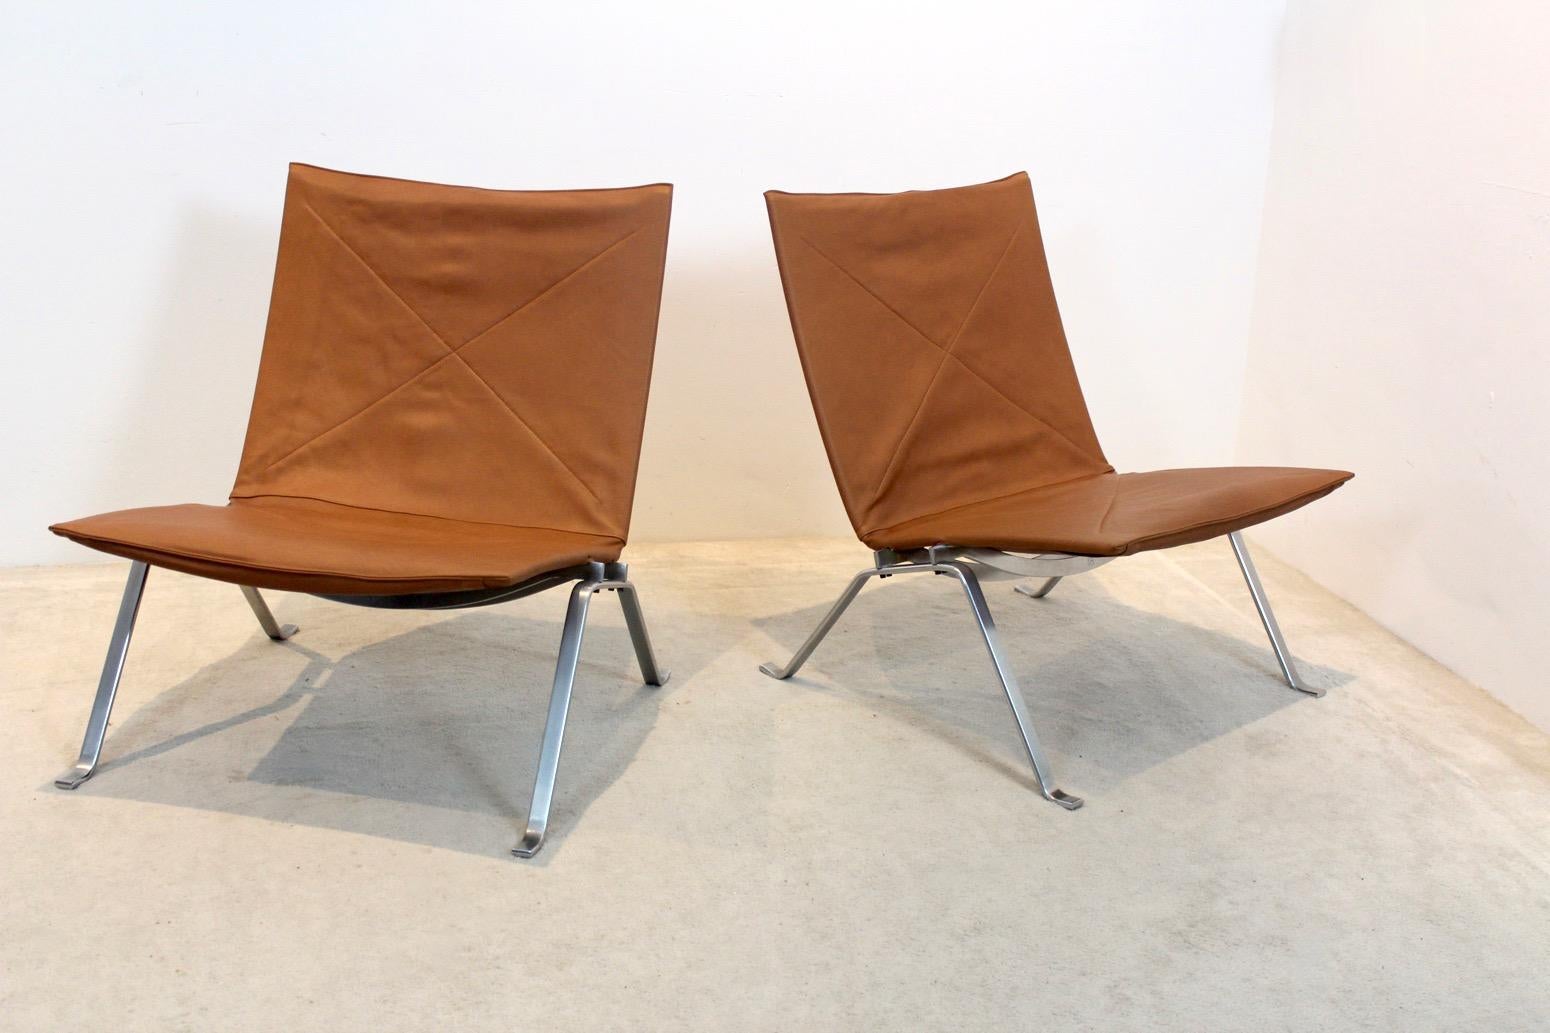 Exquisite Cognac Leather PK22 chairs by Poul Kjærholm for E. Kold Christensen For Sale 4